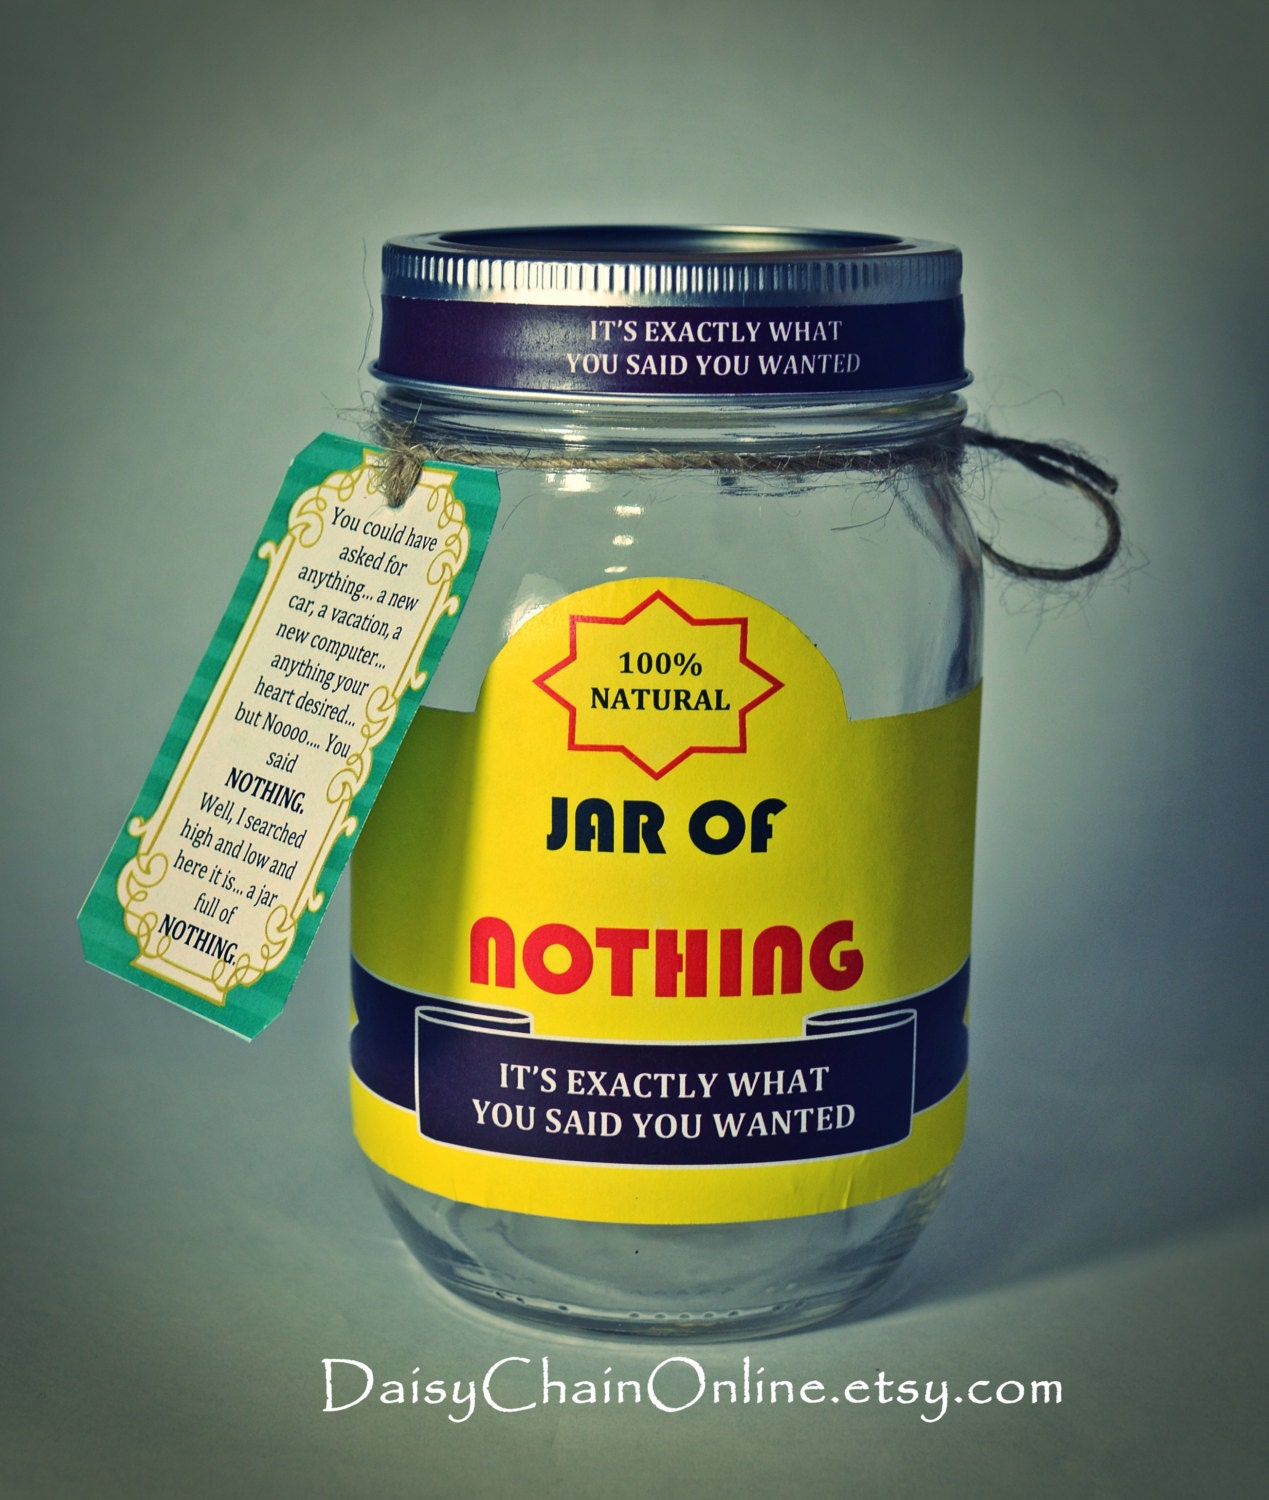 Best Gag Gift A Jar of Nothing Funny Gift by DaisyChainOnline